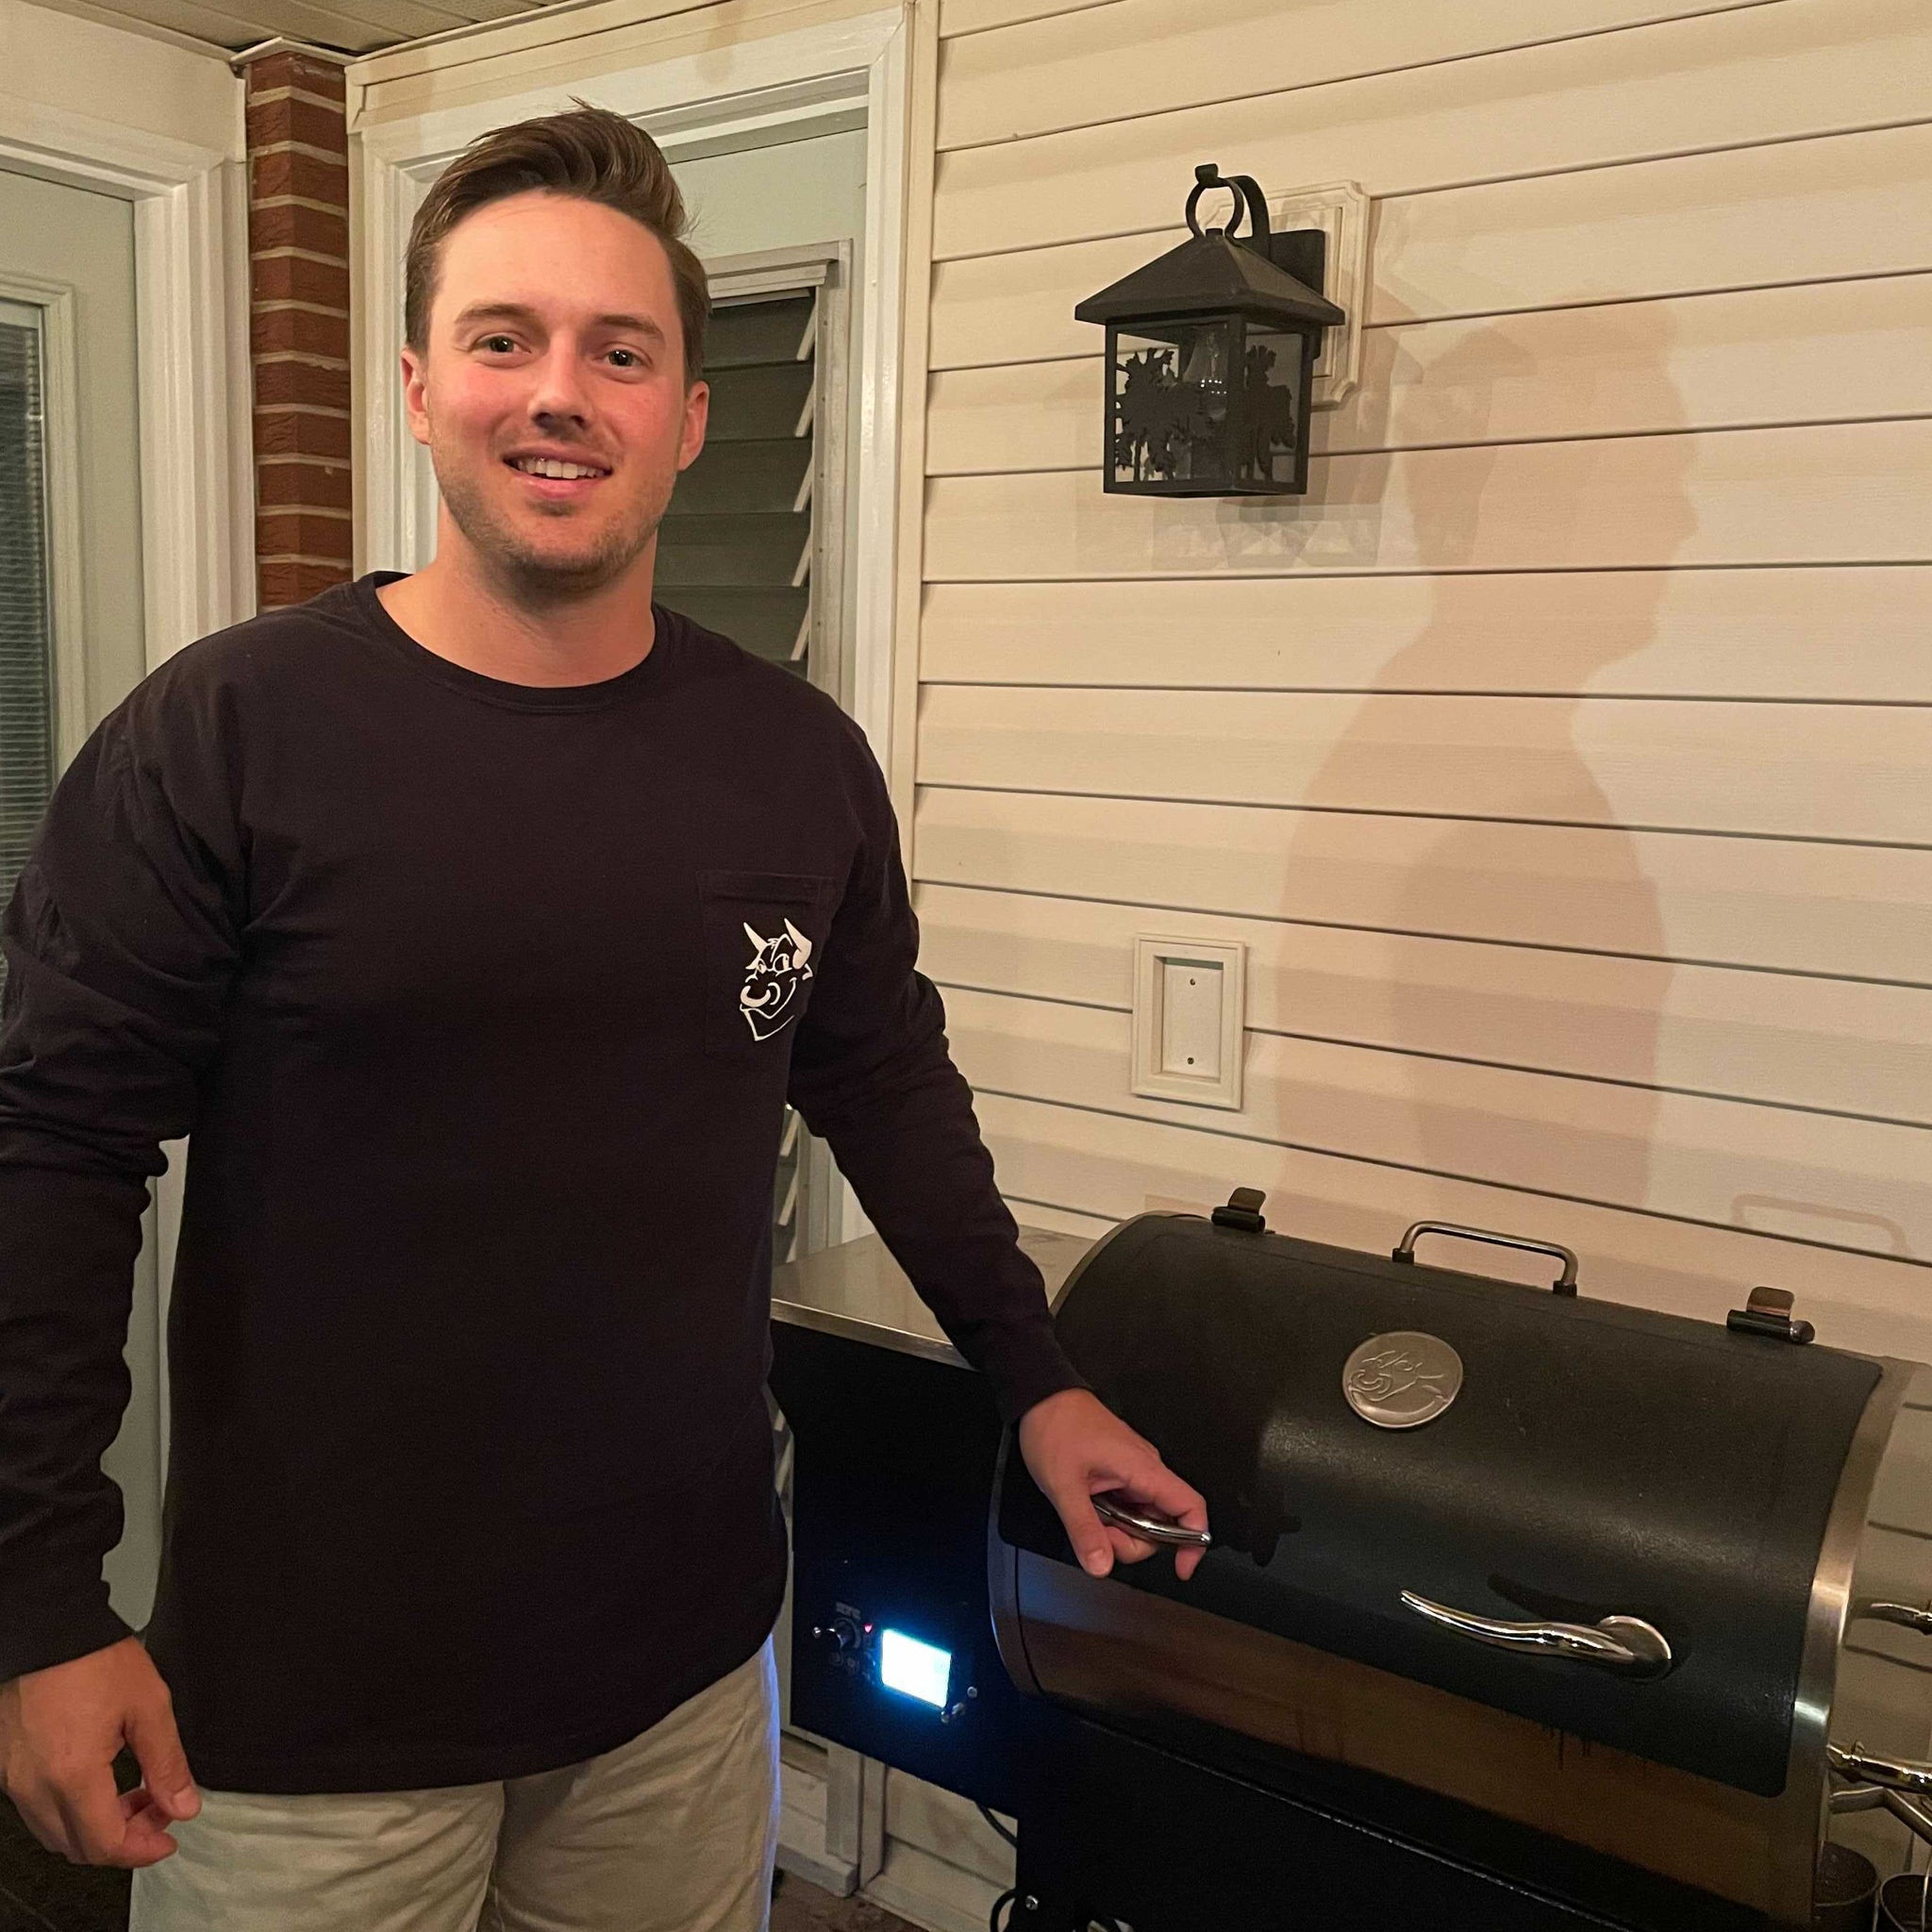 recteq customer service representative, David Hemann, at home on his deck cooking on his RT-340 wood pellet grill. 